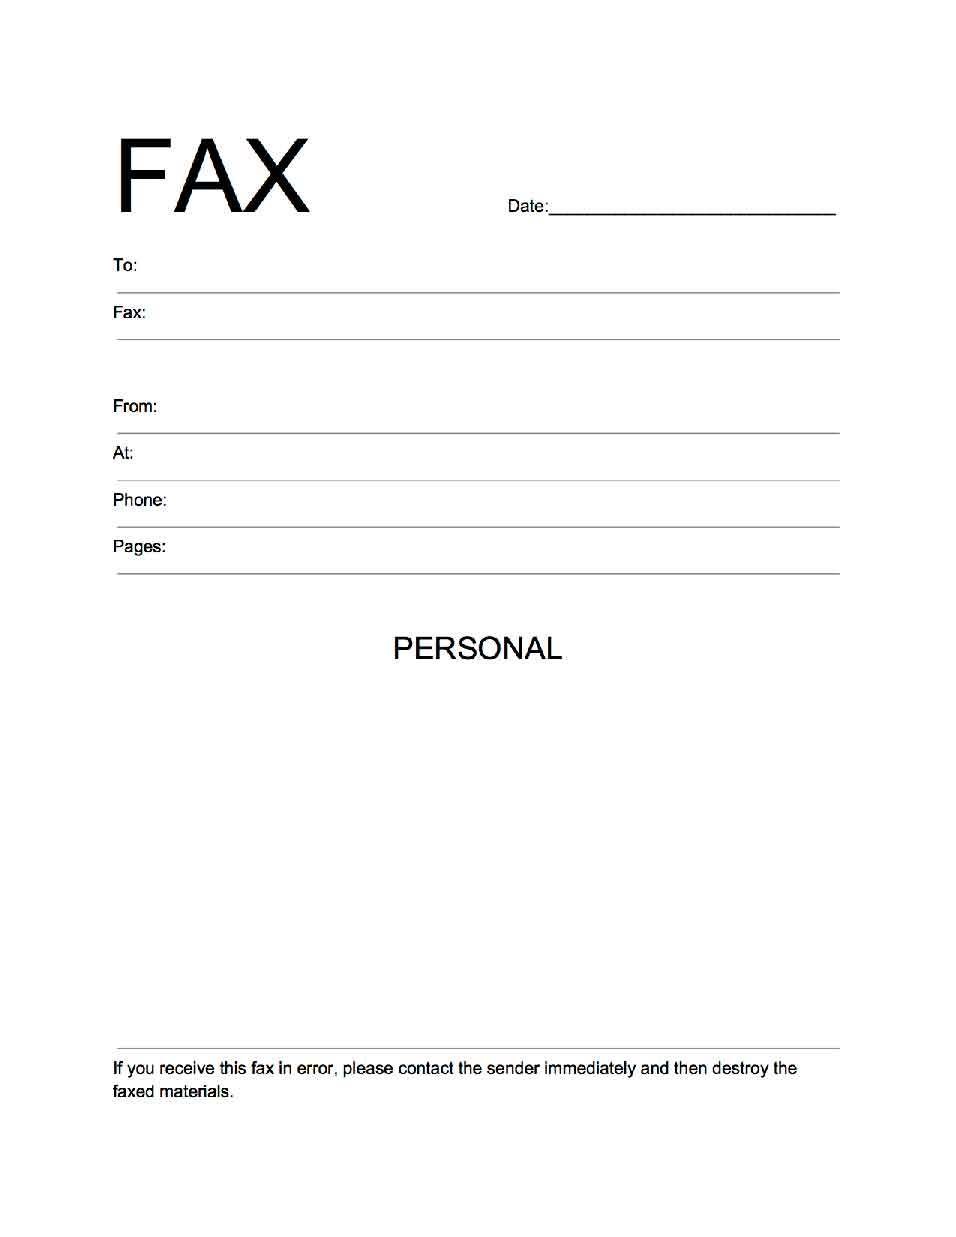 Free Printable Fax Cover Sheet No Download | Shop Fresh - Free Printable Cover Letter For Fax